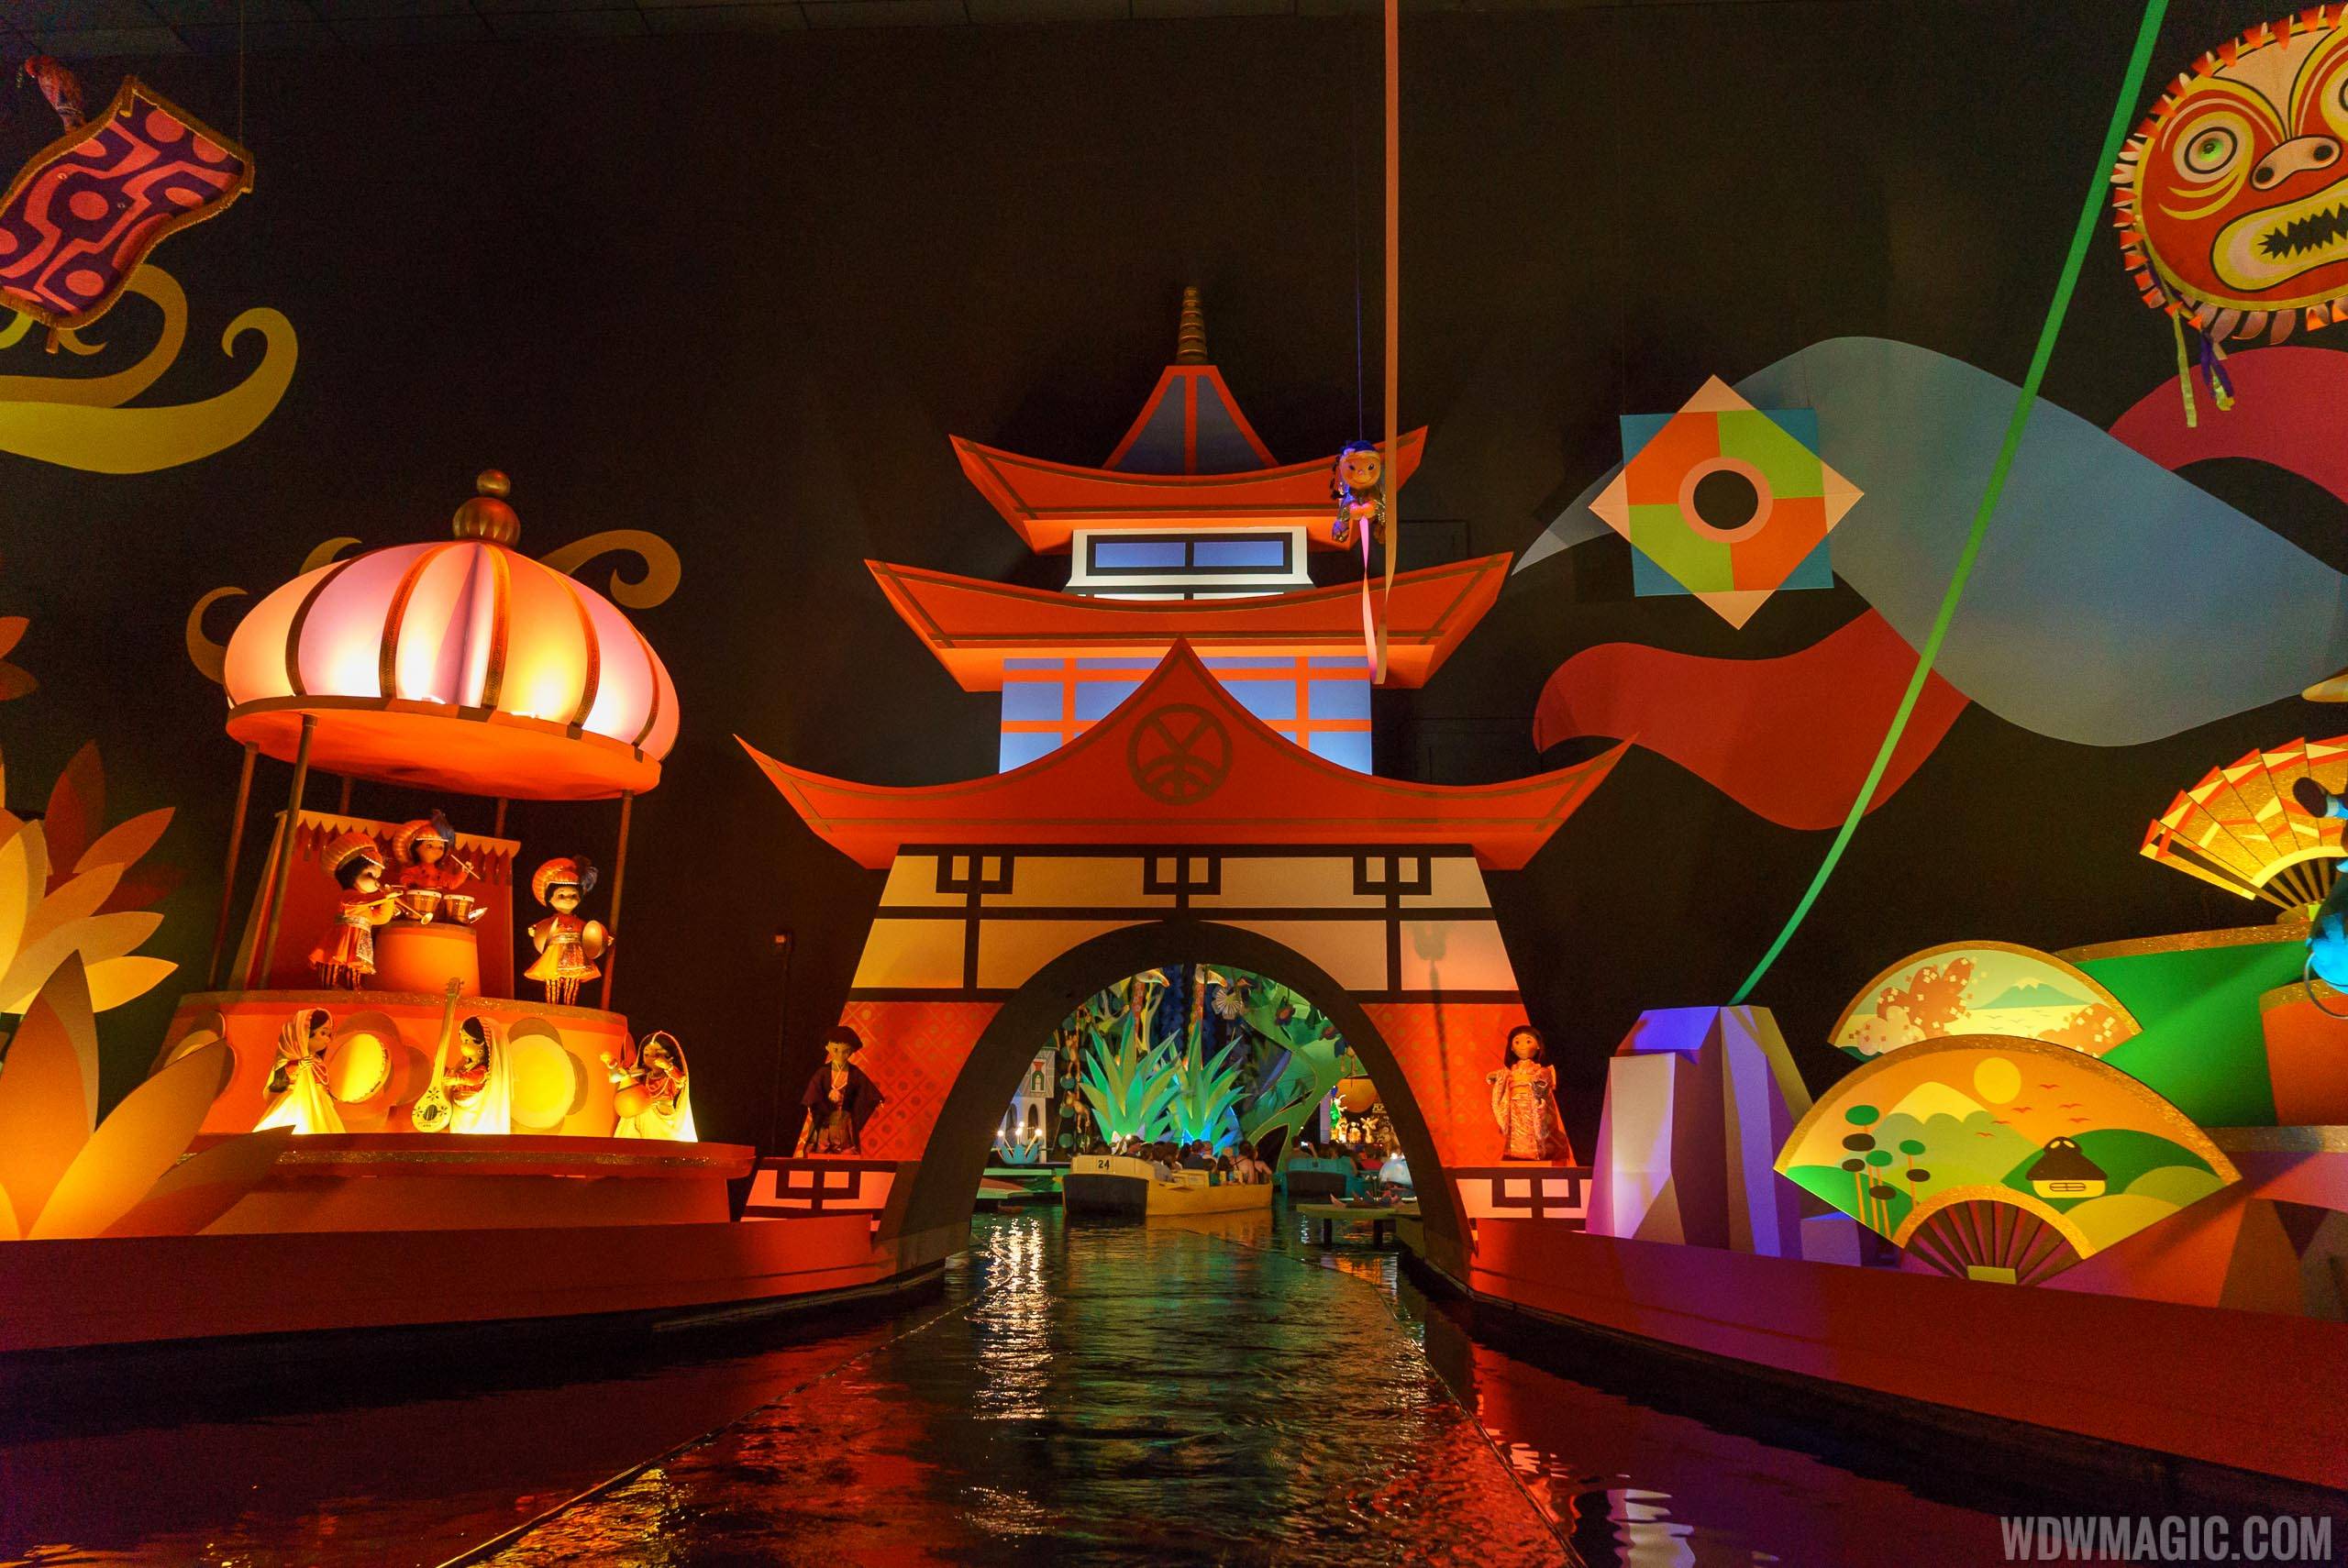 Small World reopening date revised